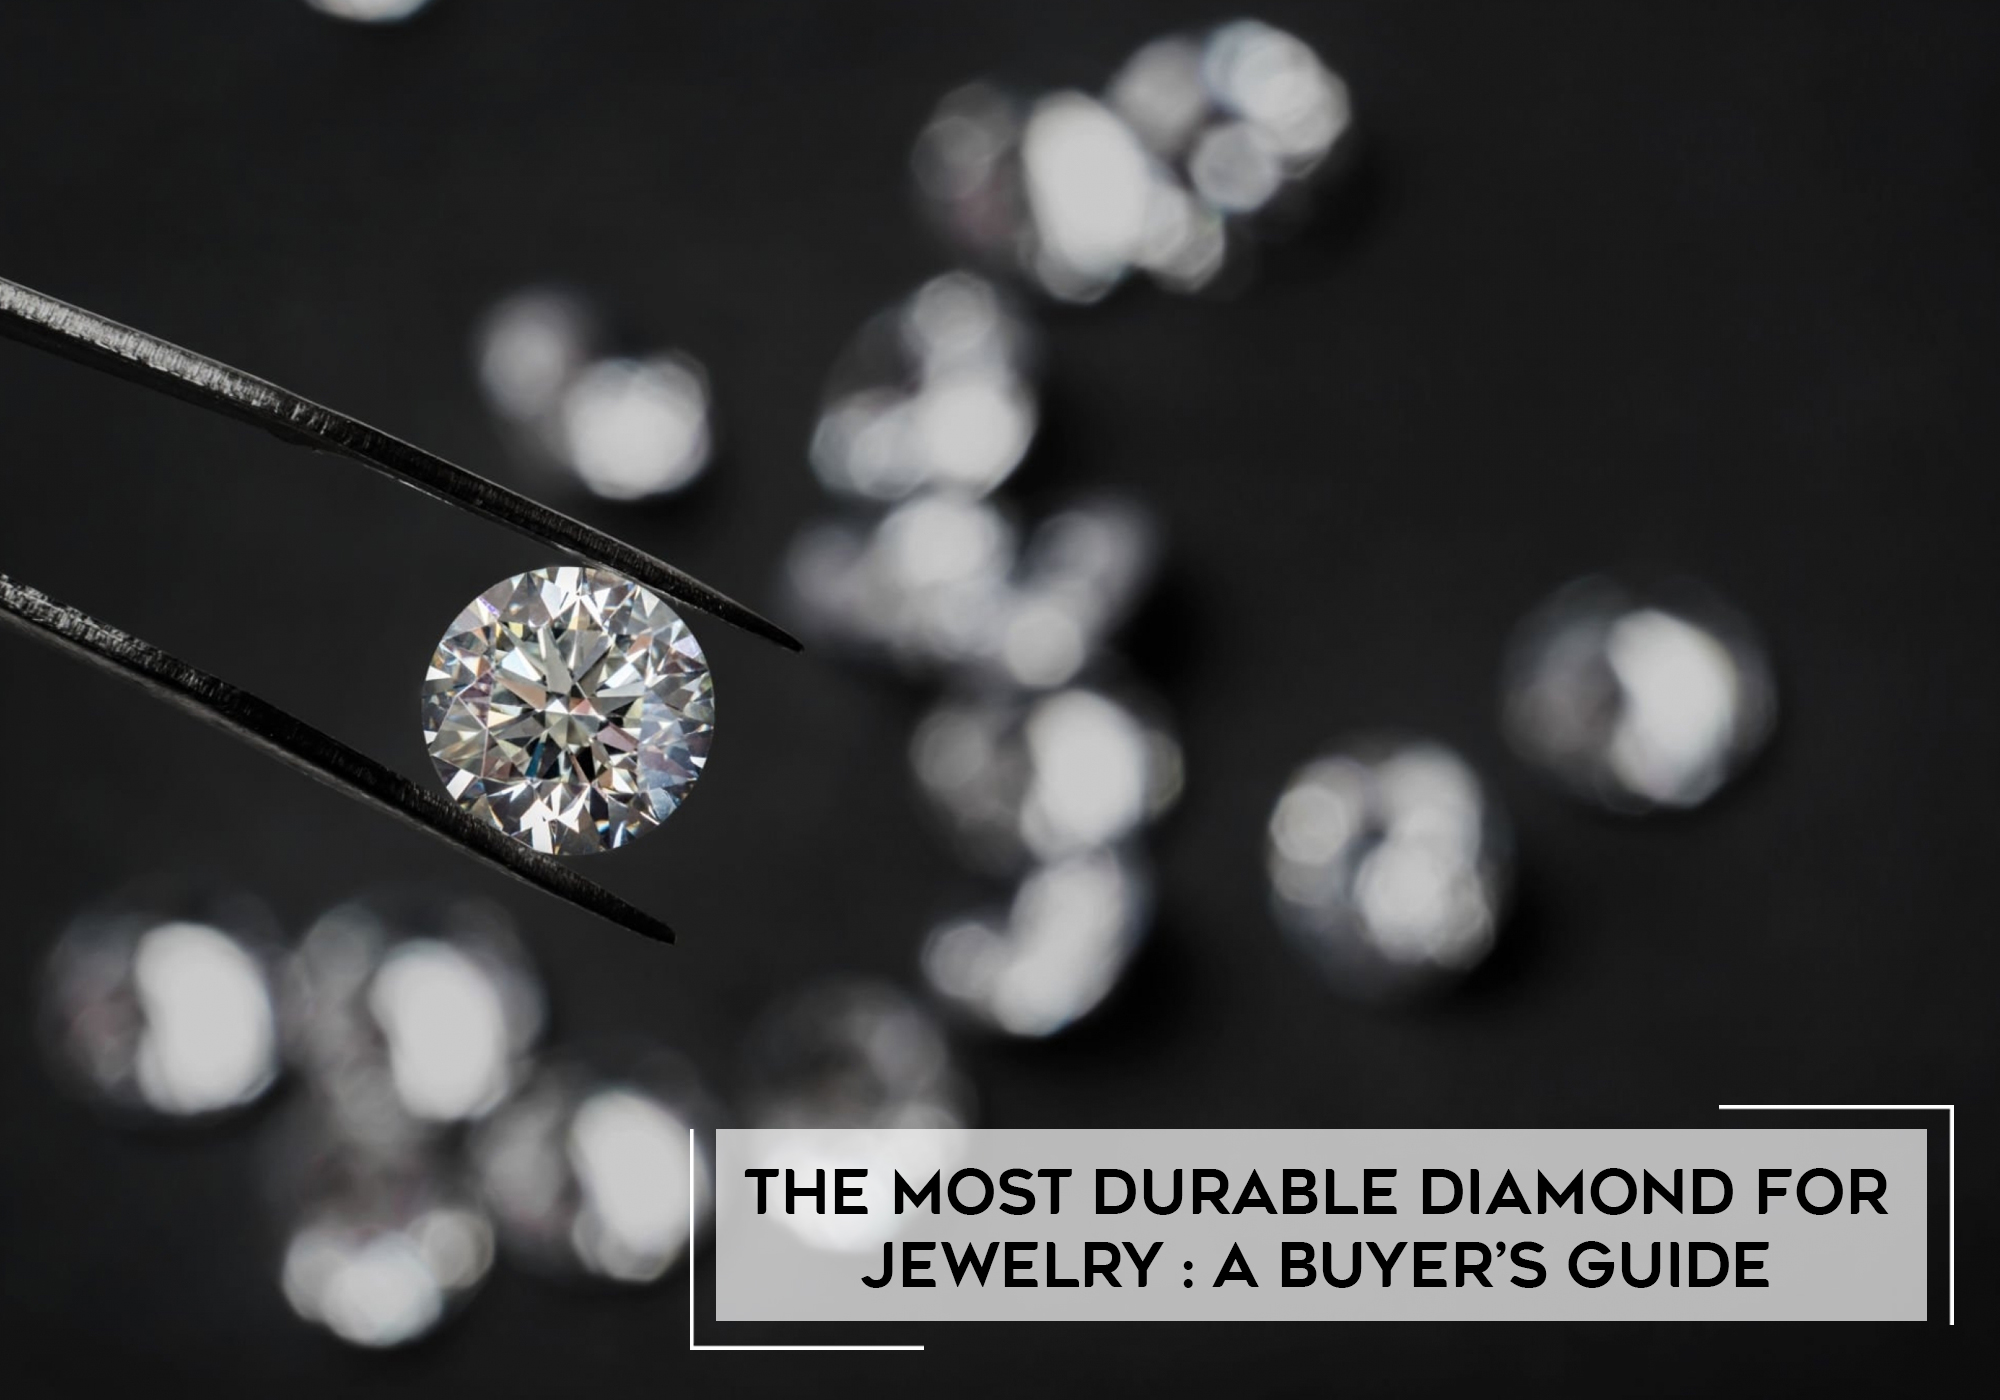 What are durable diamonds